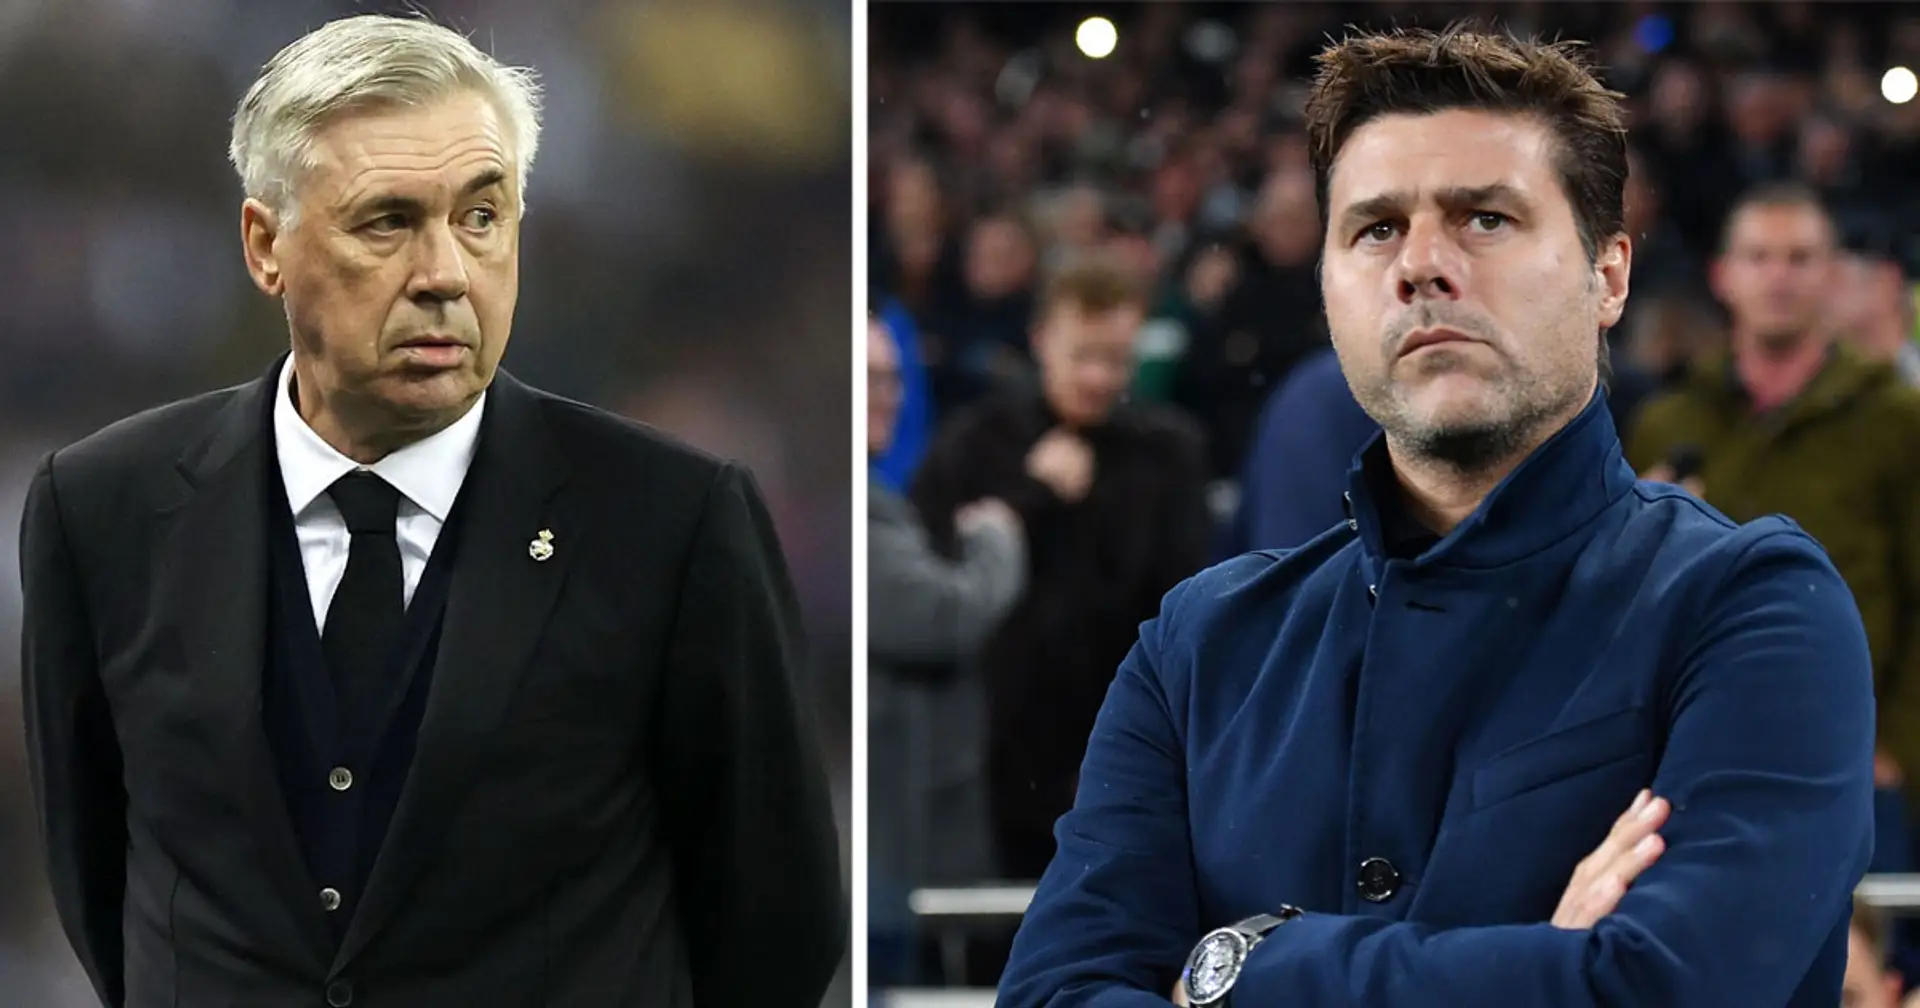 Pochettino rejected multiple offers as he waits for Madrid job opening (reliability: 4 stars)